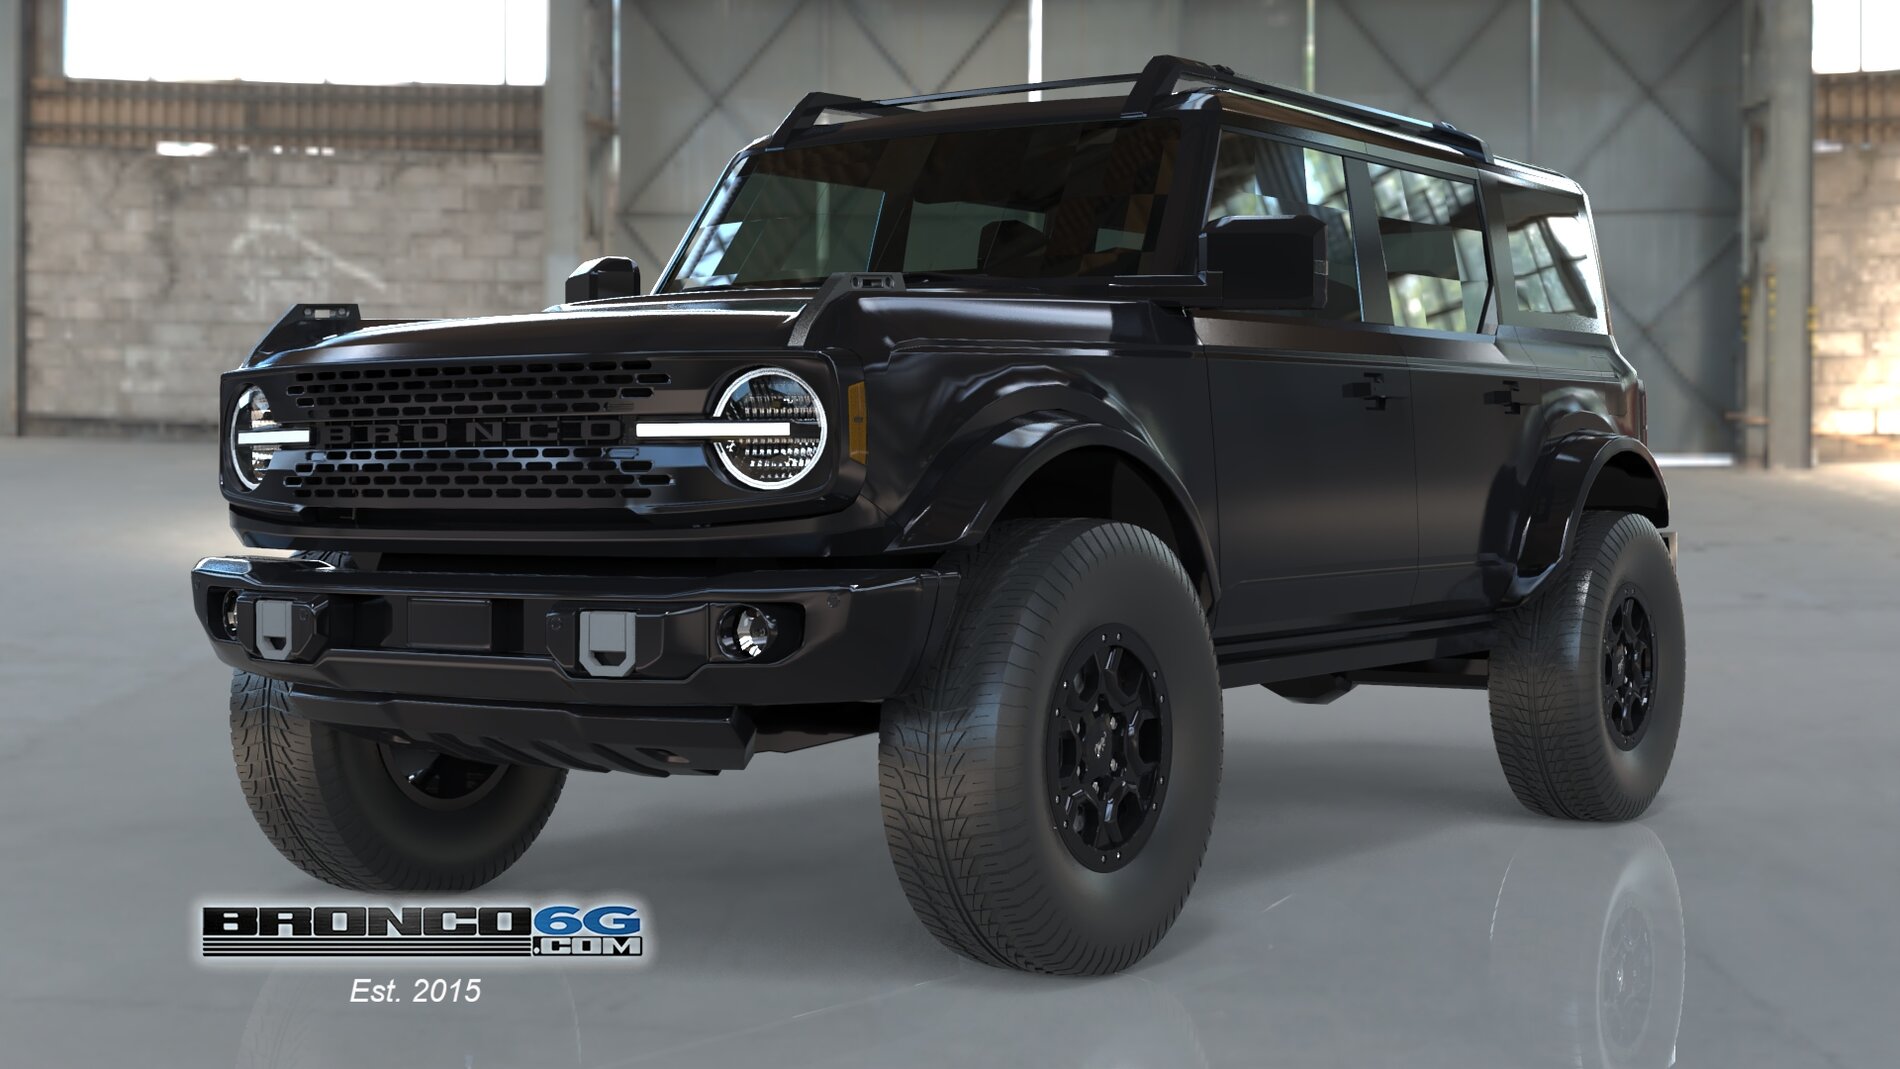 Ford Bronco Blacked Out 2021 Bronco With Satin / Matte Wrap Rendered Look Blacked Out 2021 Bronco Satin Matte Vinyl Wrap 1